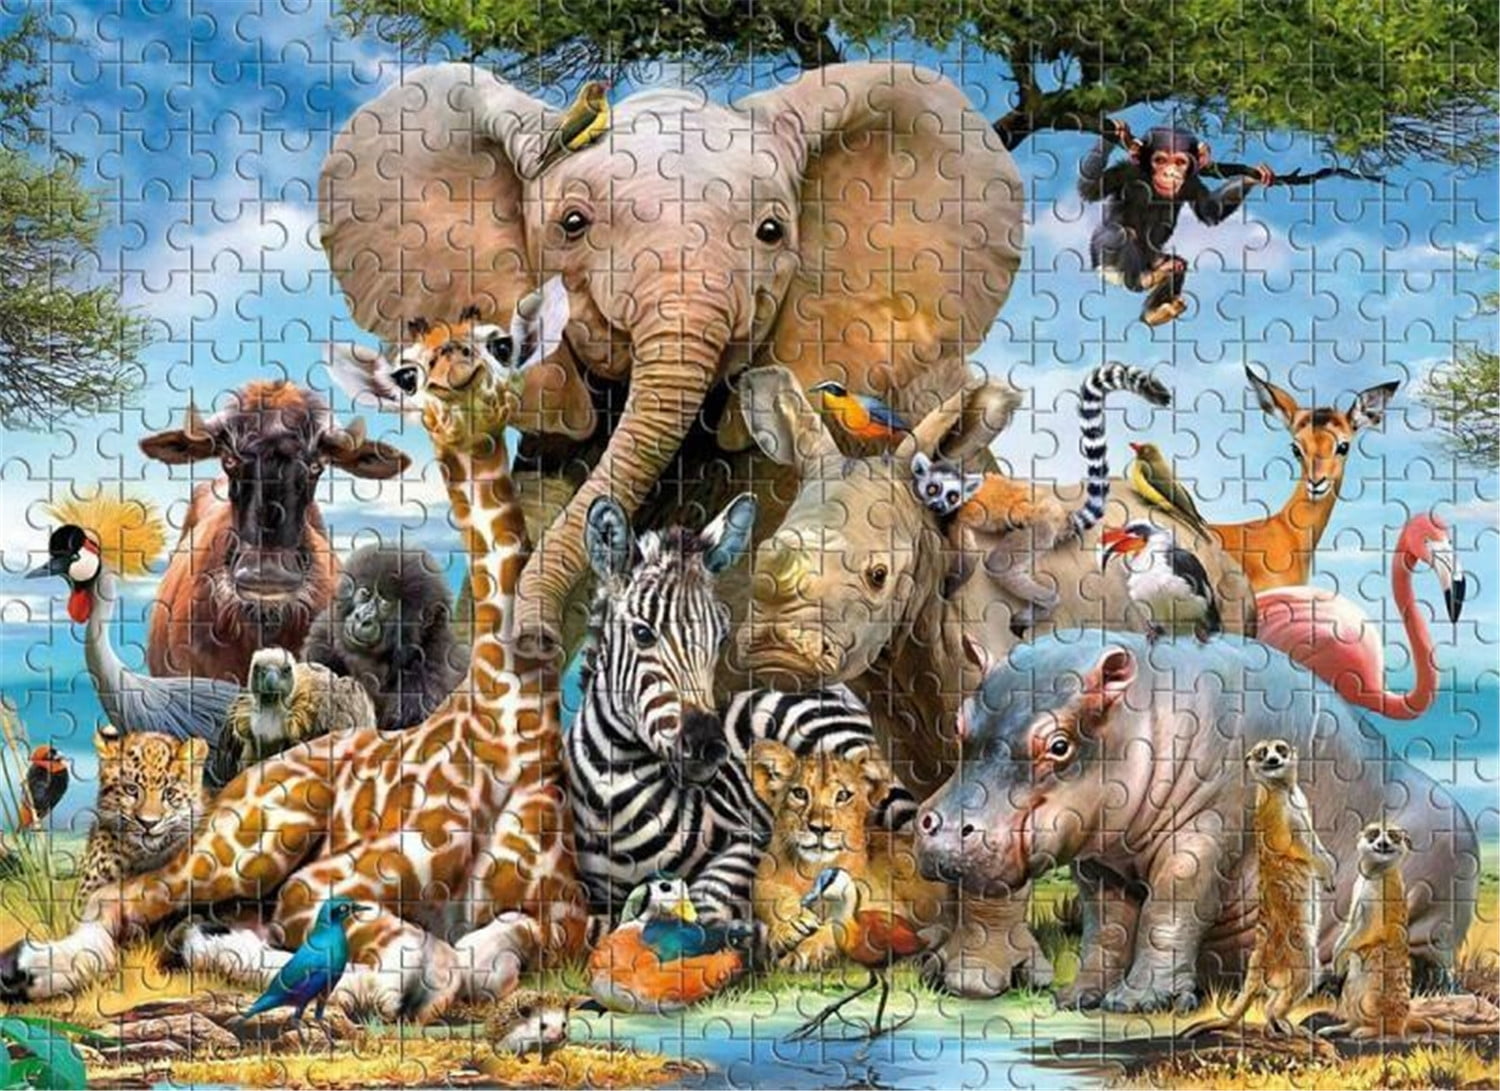 BBC 1000PC JIGSAW ROLL PUZZLE PIECE EDUCATIONAL ANIMAL FUN GIFT FAMILY NATURE 